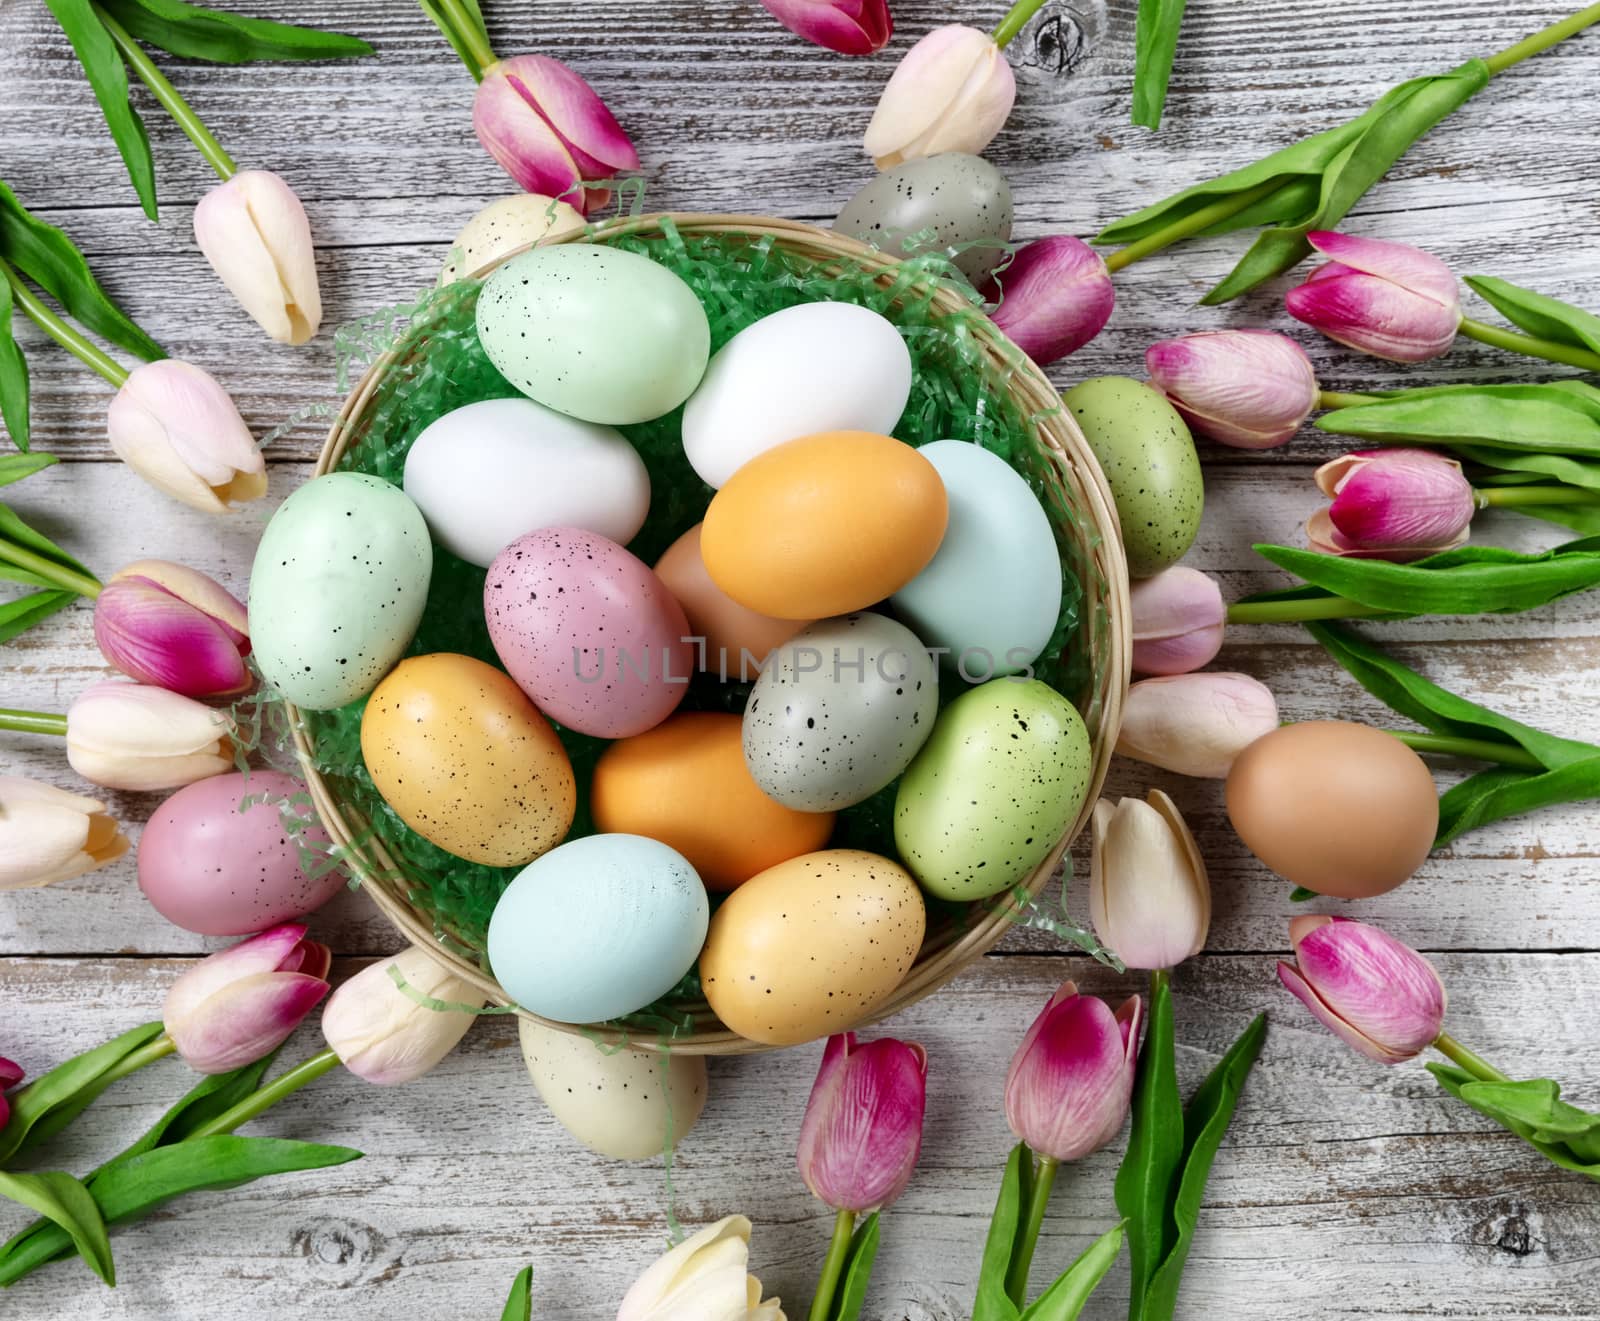 Happy Easter concept with basket filled of colorful eggs and spring flowers on white rustic wood. Overhead view layout 